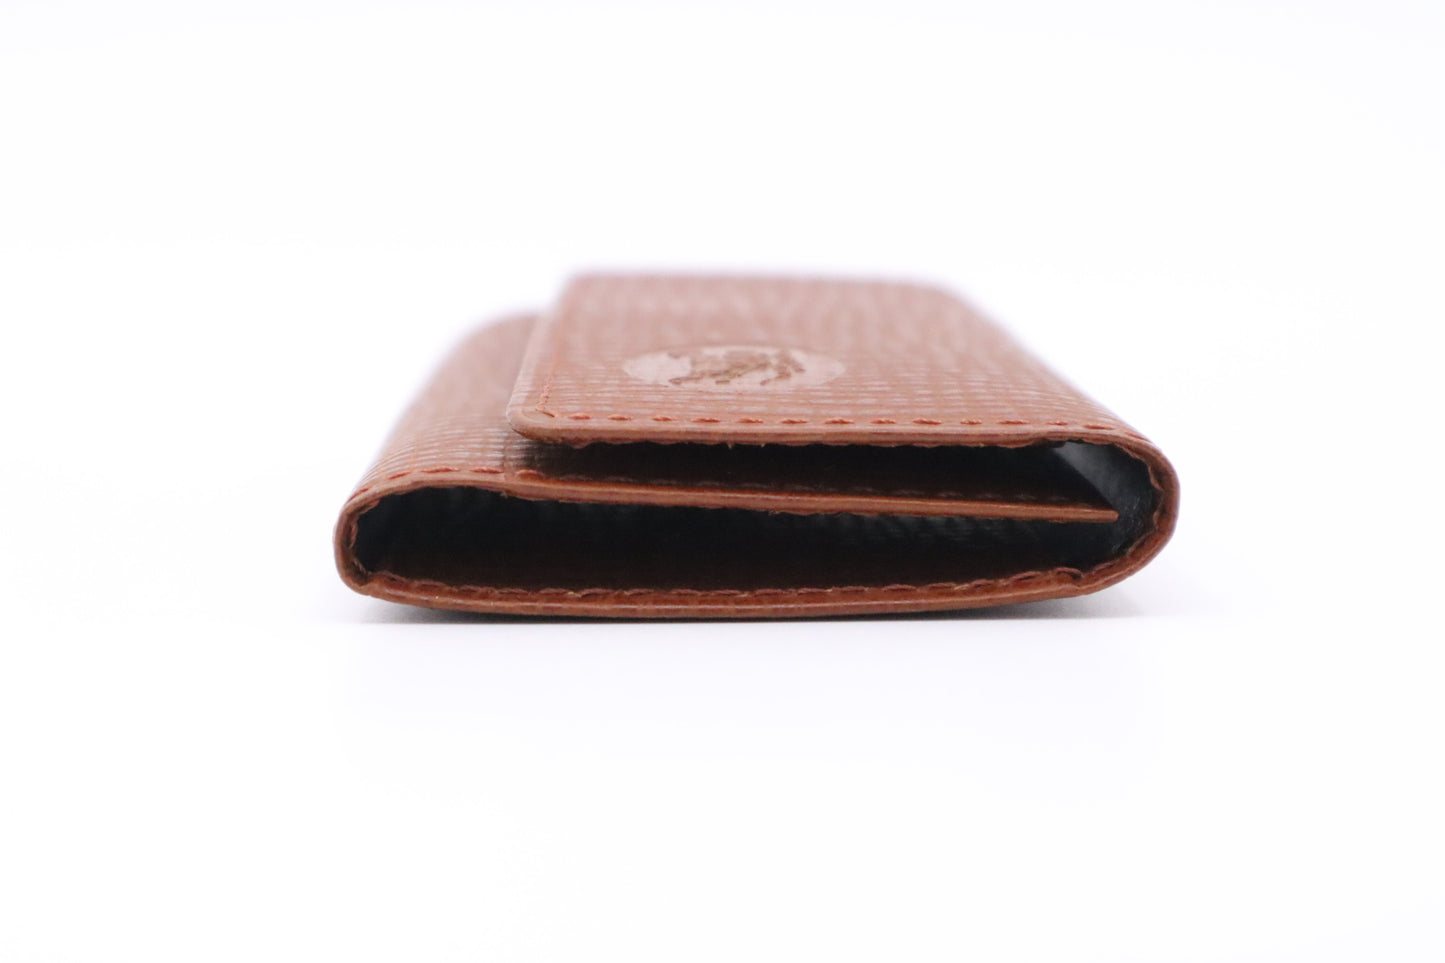 Burberry Key Case in Brown Leather